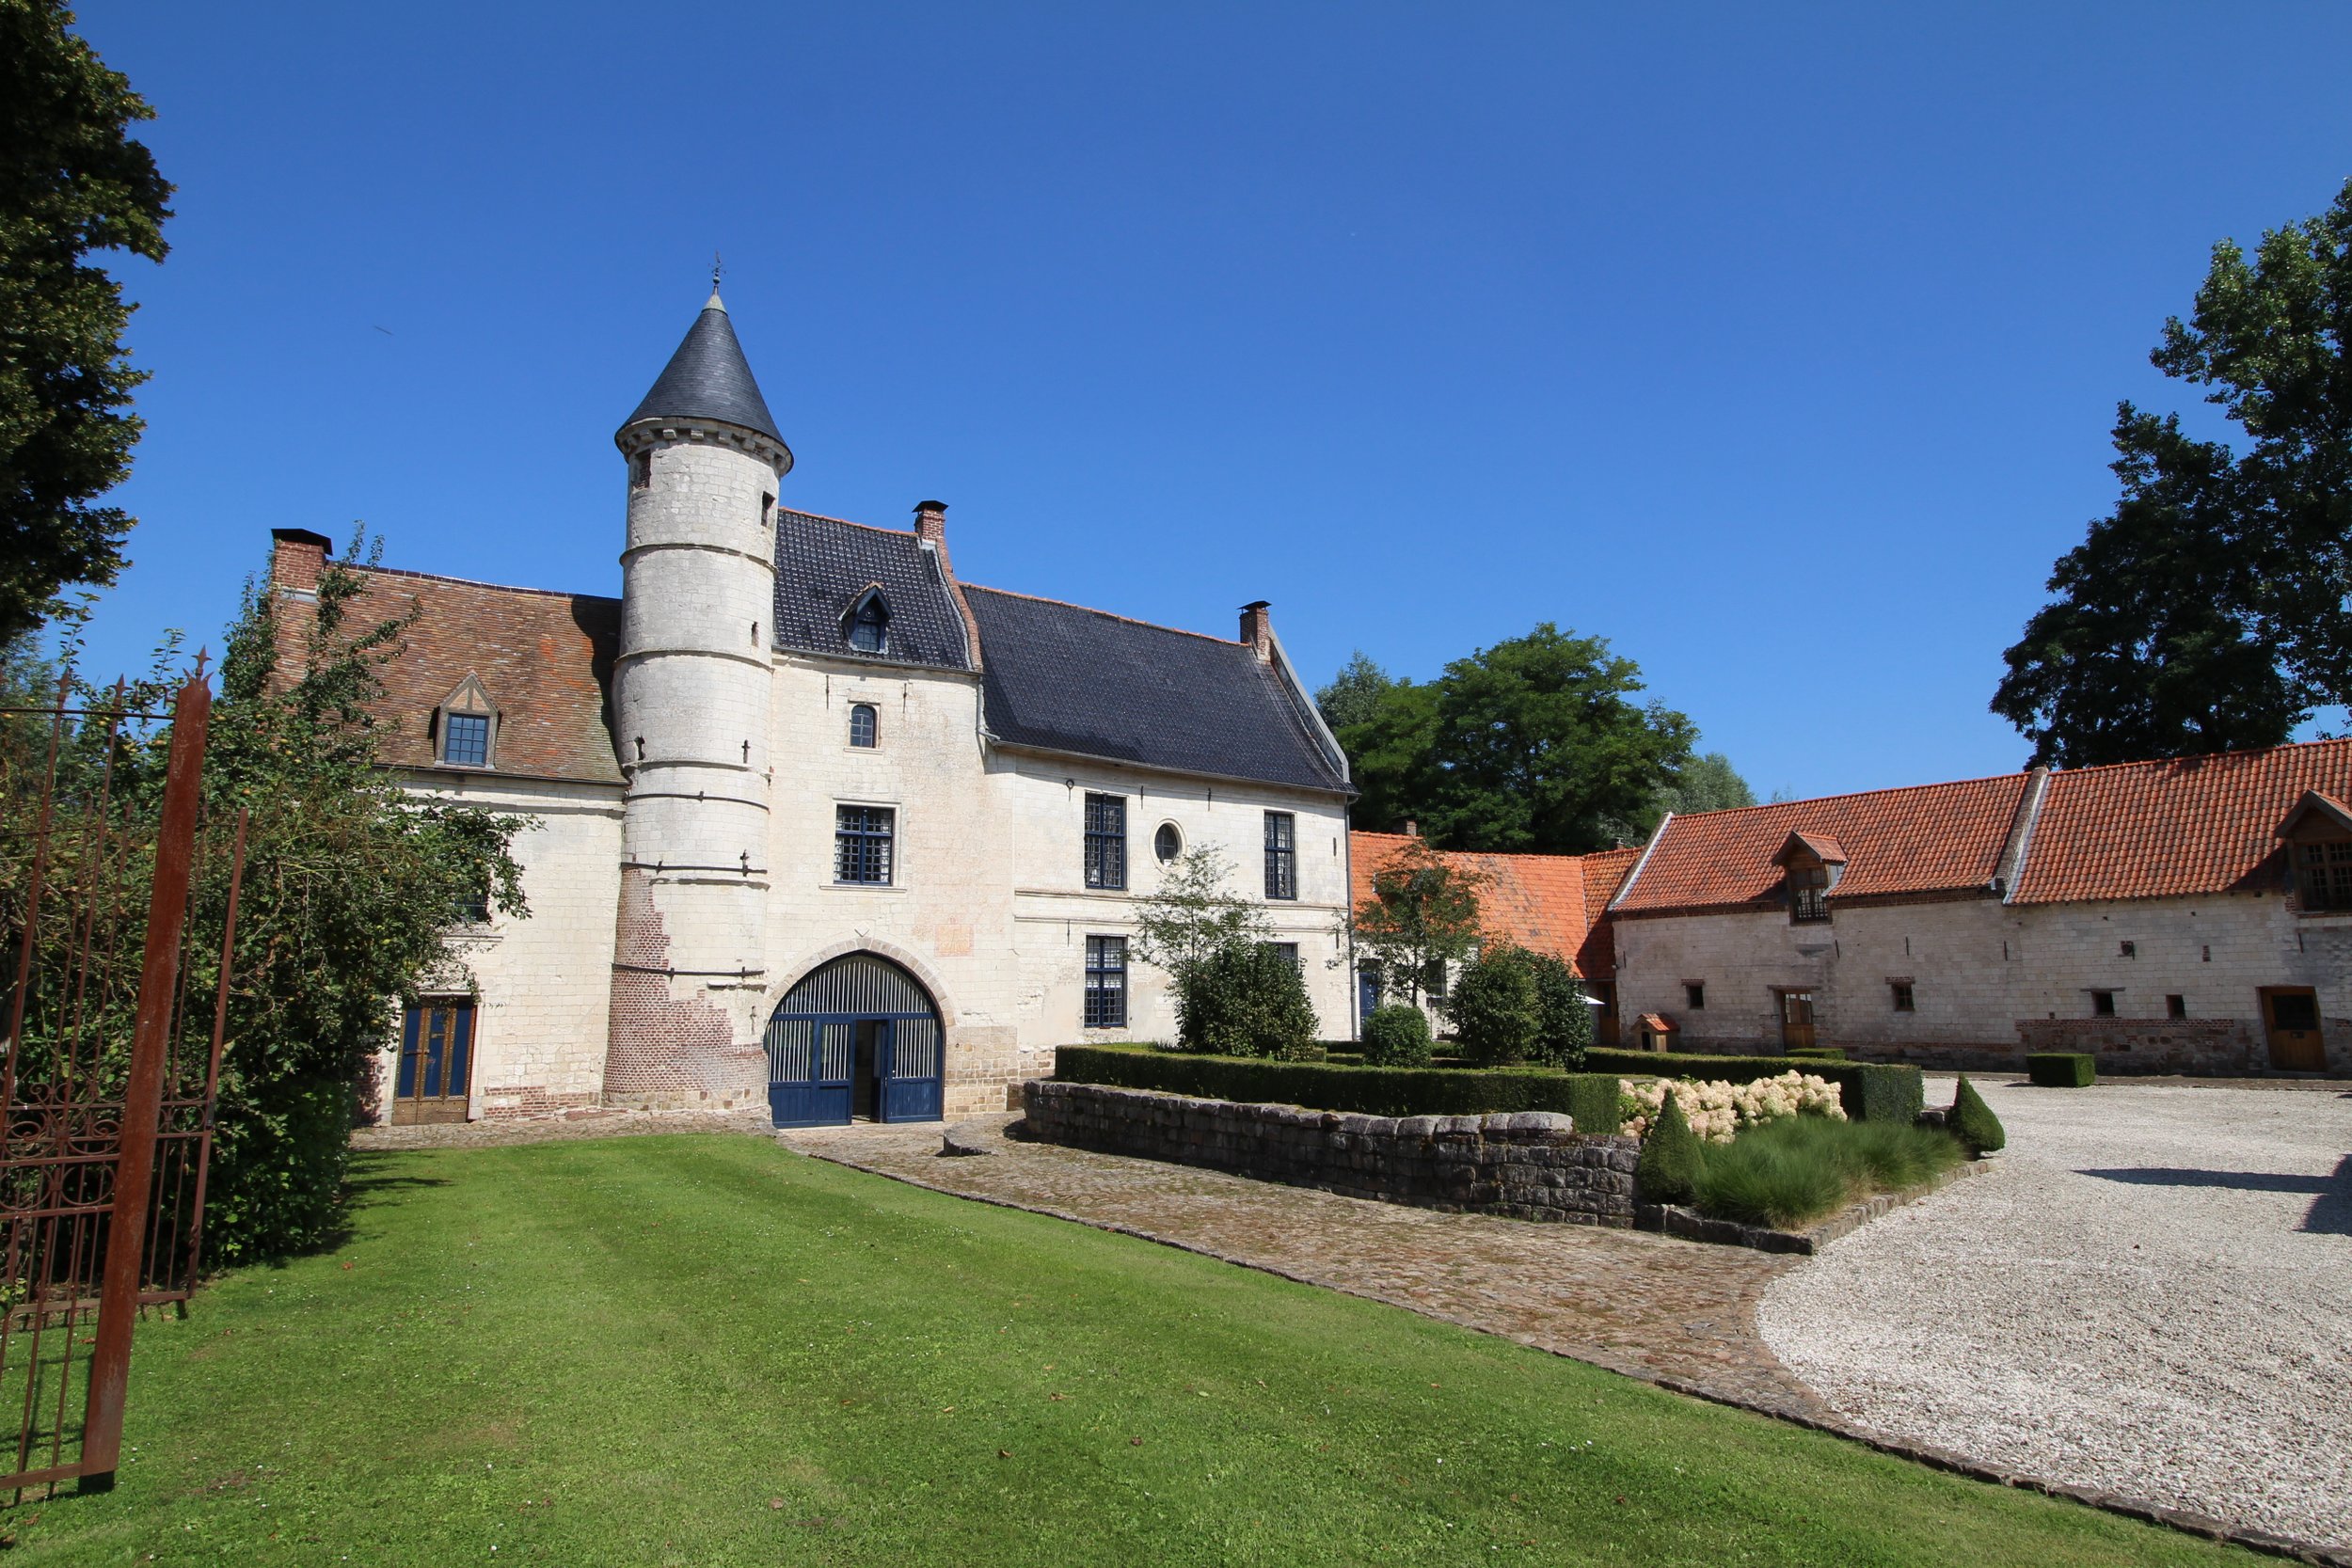 Francis York  Renovated 16th Century Manor House in Northern France 00006.JPG